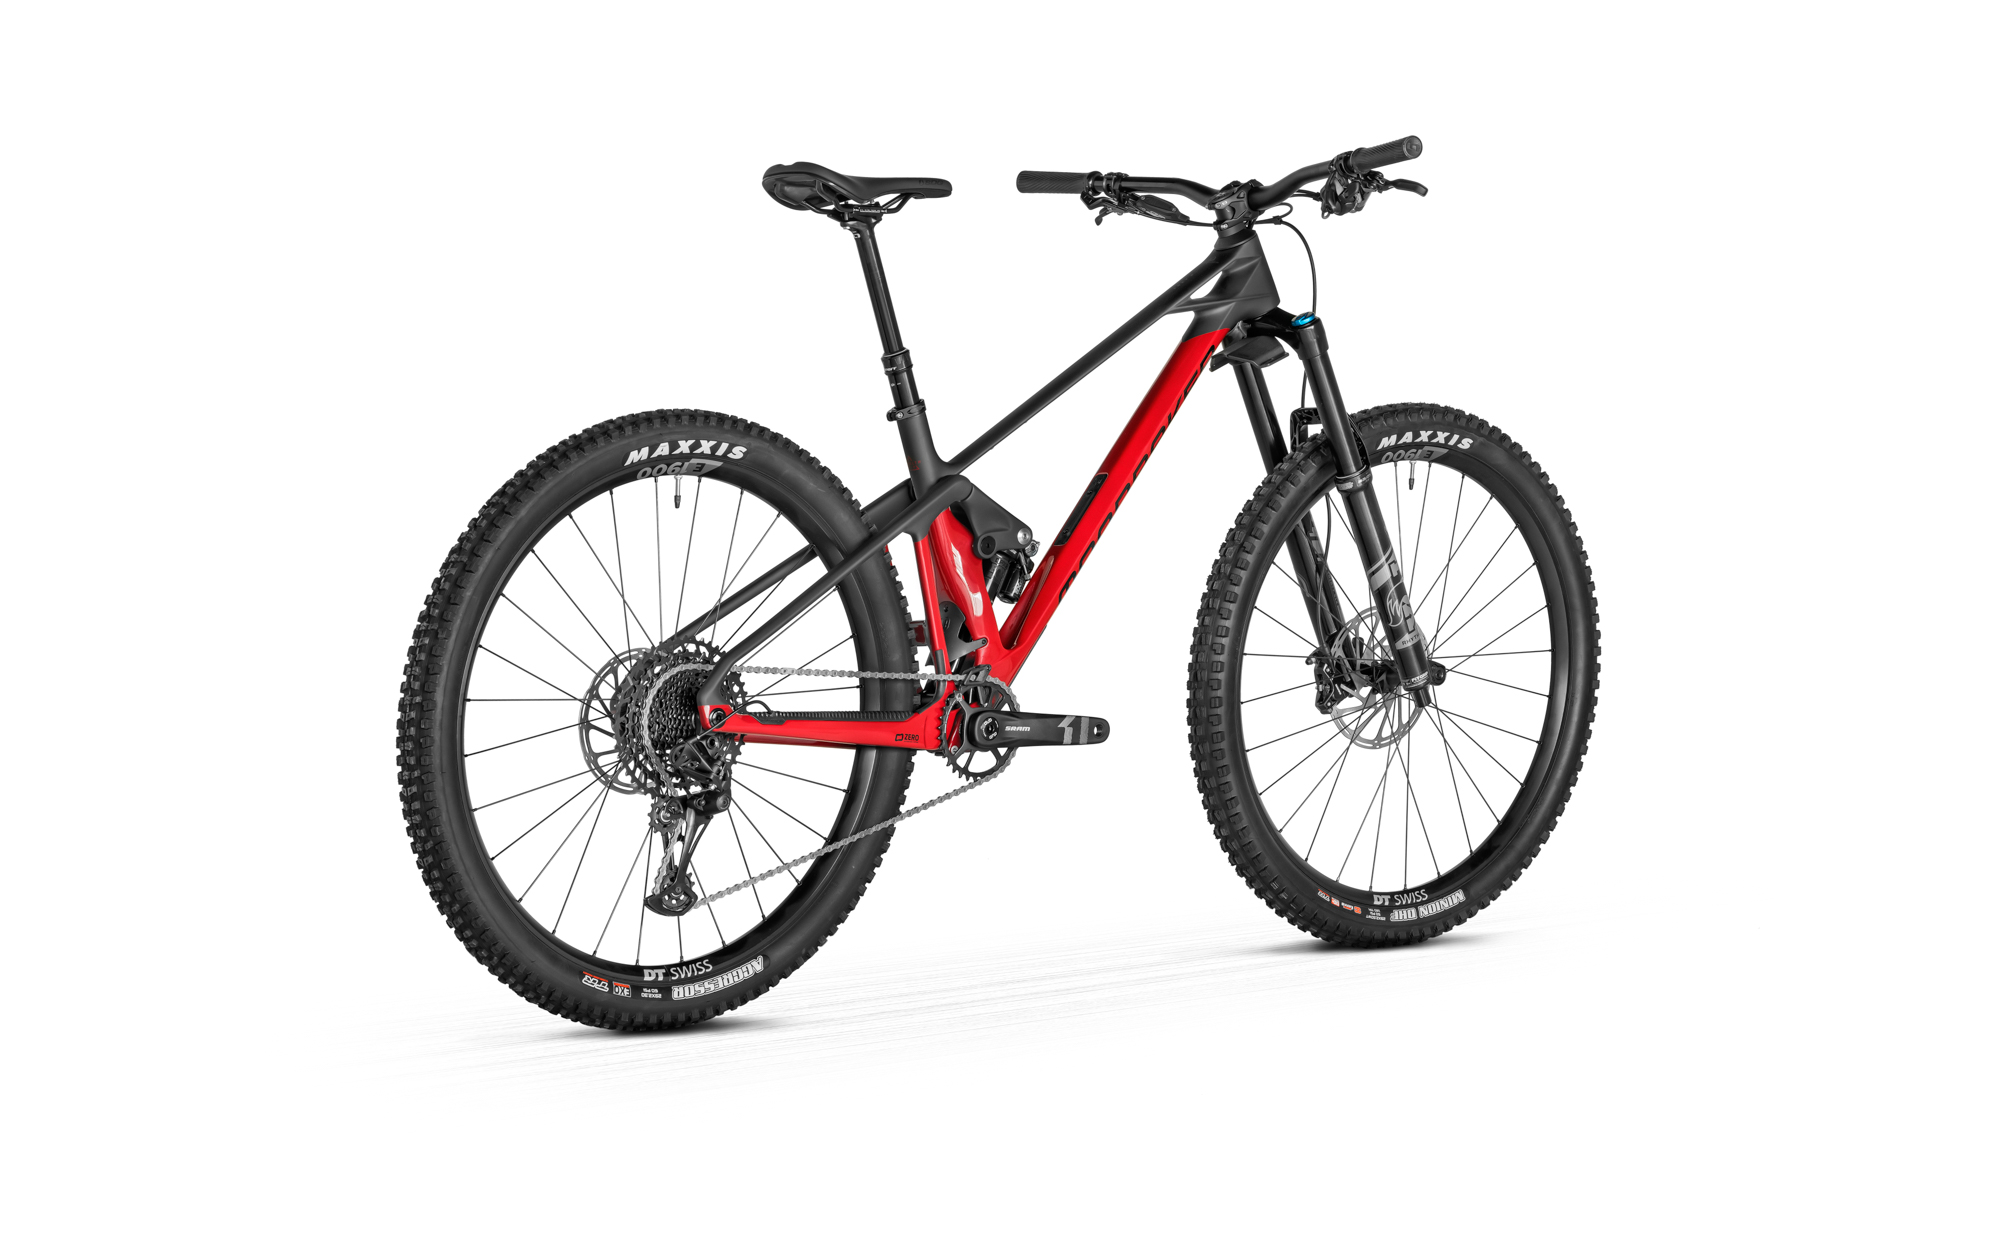 Foxy Carbon R 29 MIND, cherry red/carbon, 2022